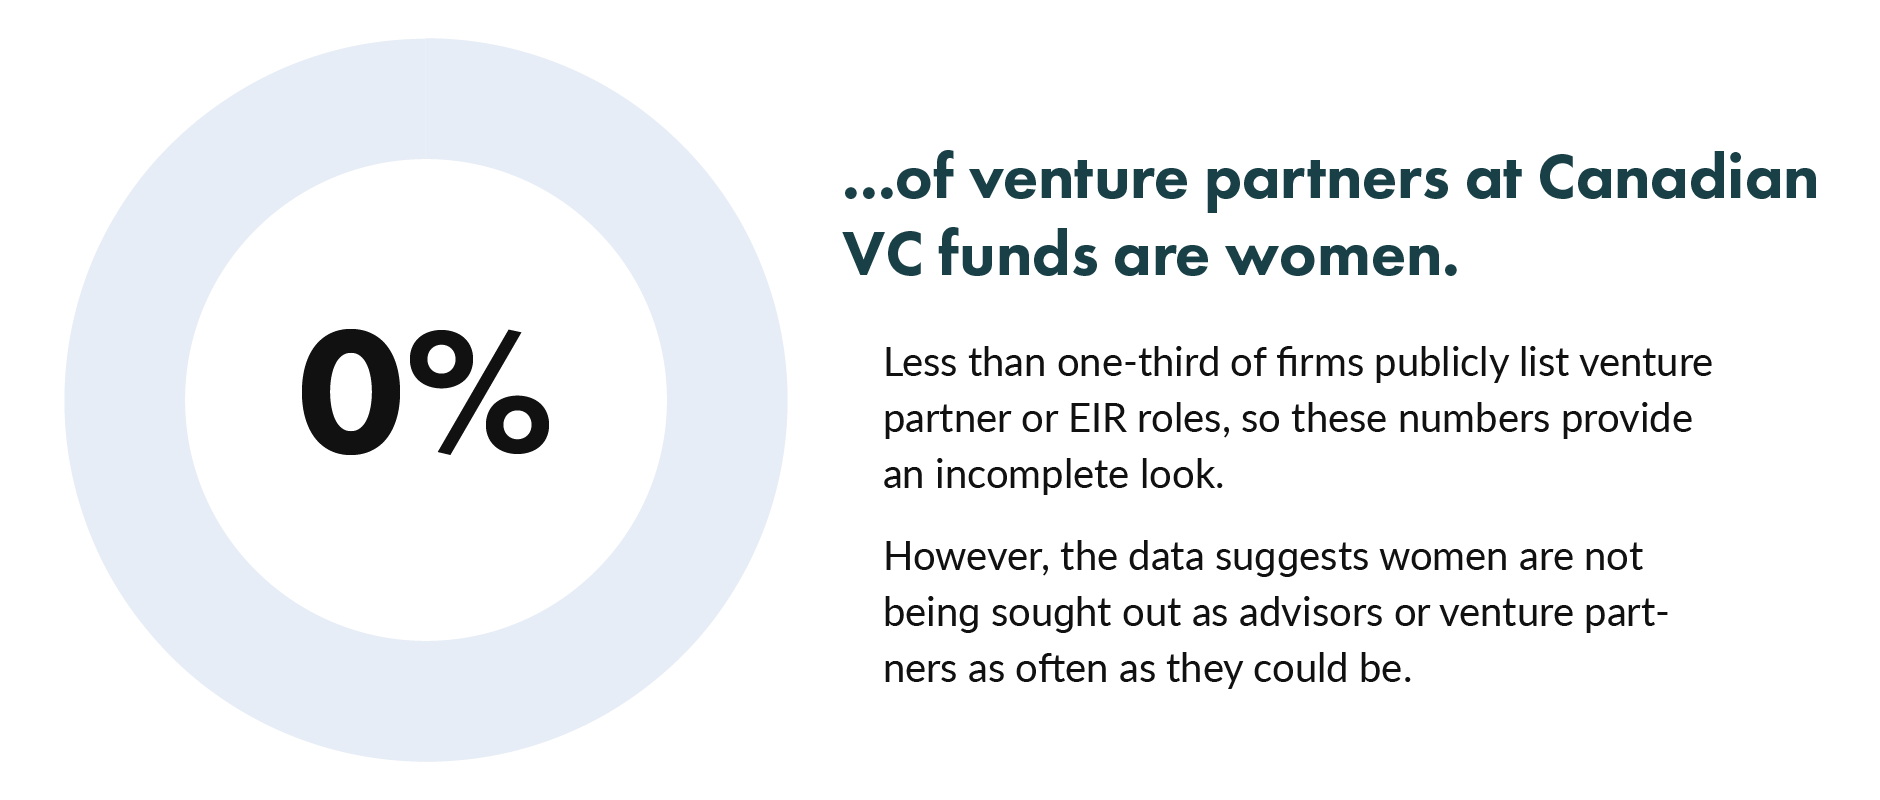 0% of venture partners at Canadian VC funds are women. Less than one-third of firms publicly list venture partner or EIR roles, so these numbers provide an incomplete look. However, the data suggests women are not being sought out as advisors or venture partners as often as they should be.